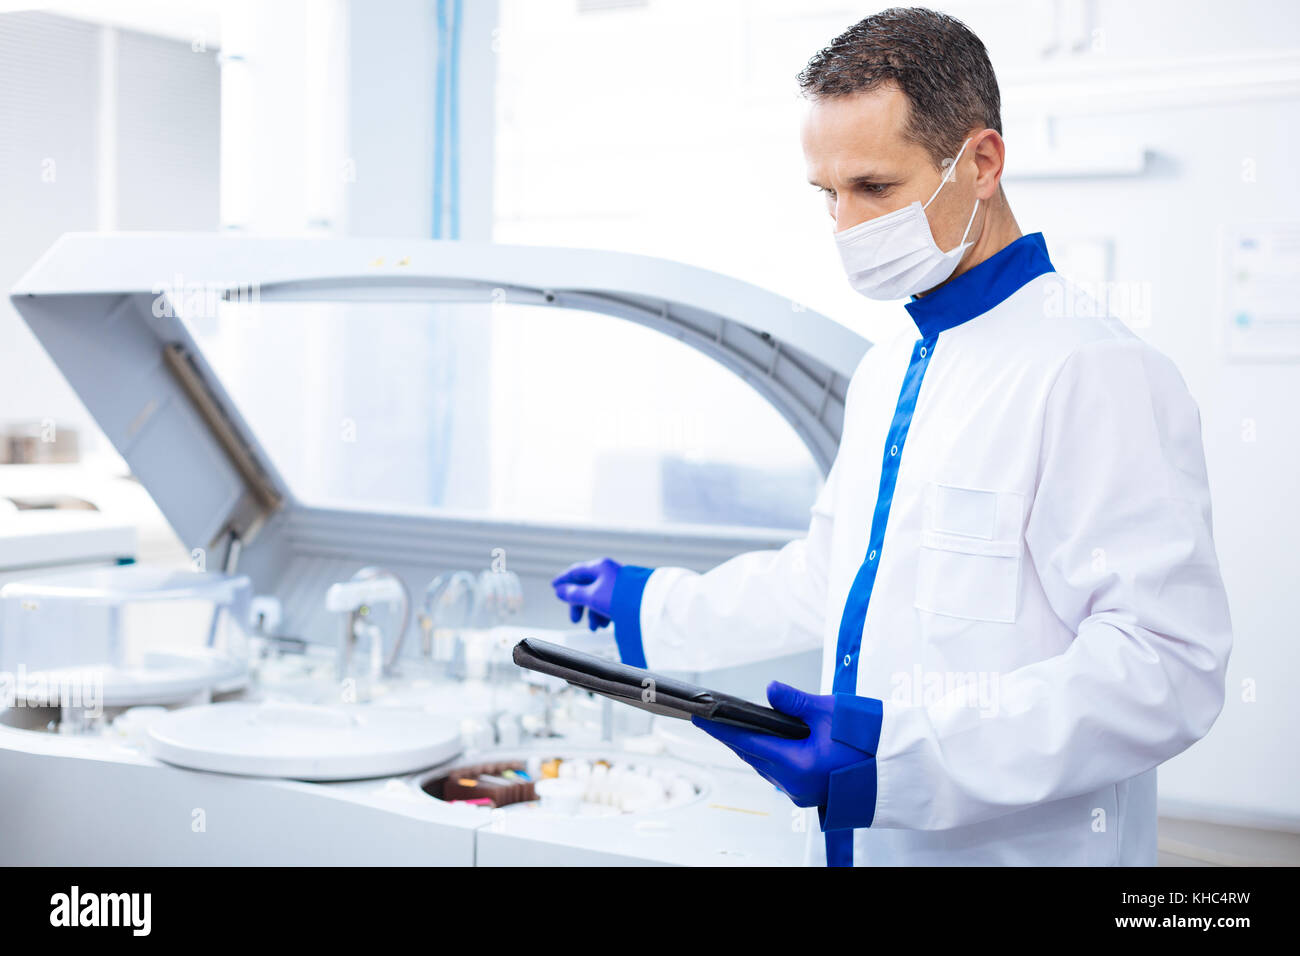 Concentrated pensive scientist  Stock Photo